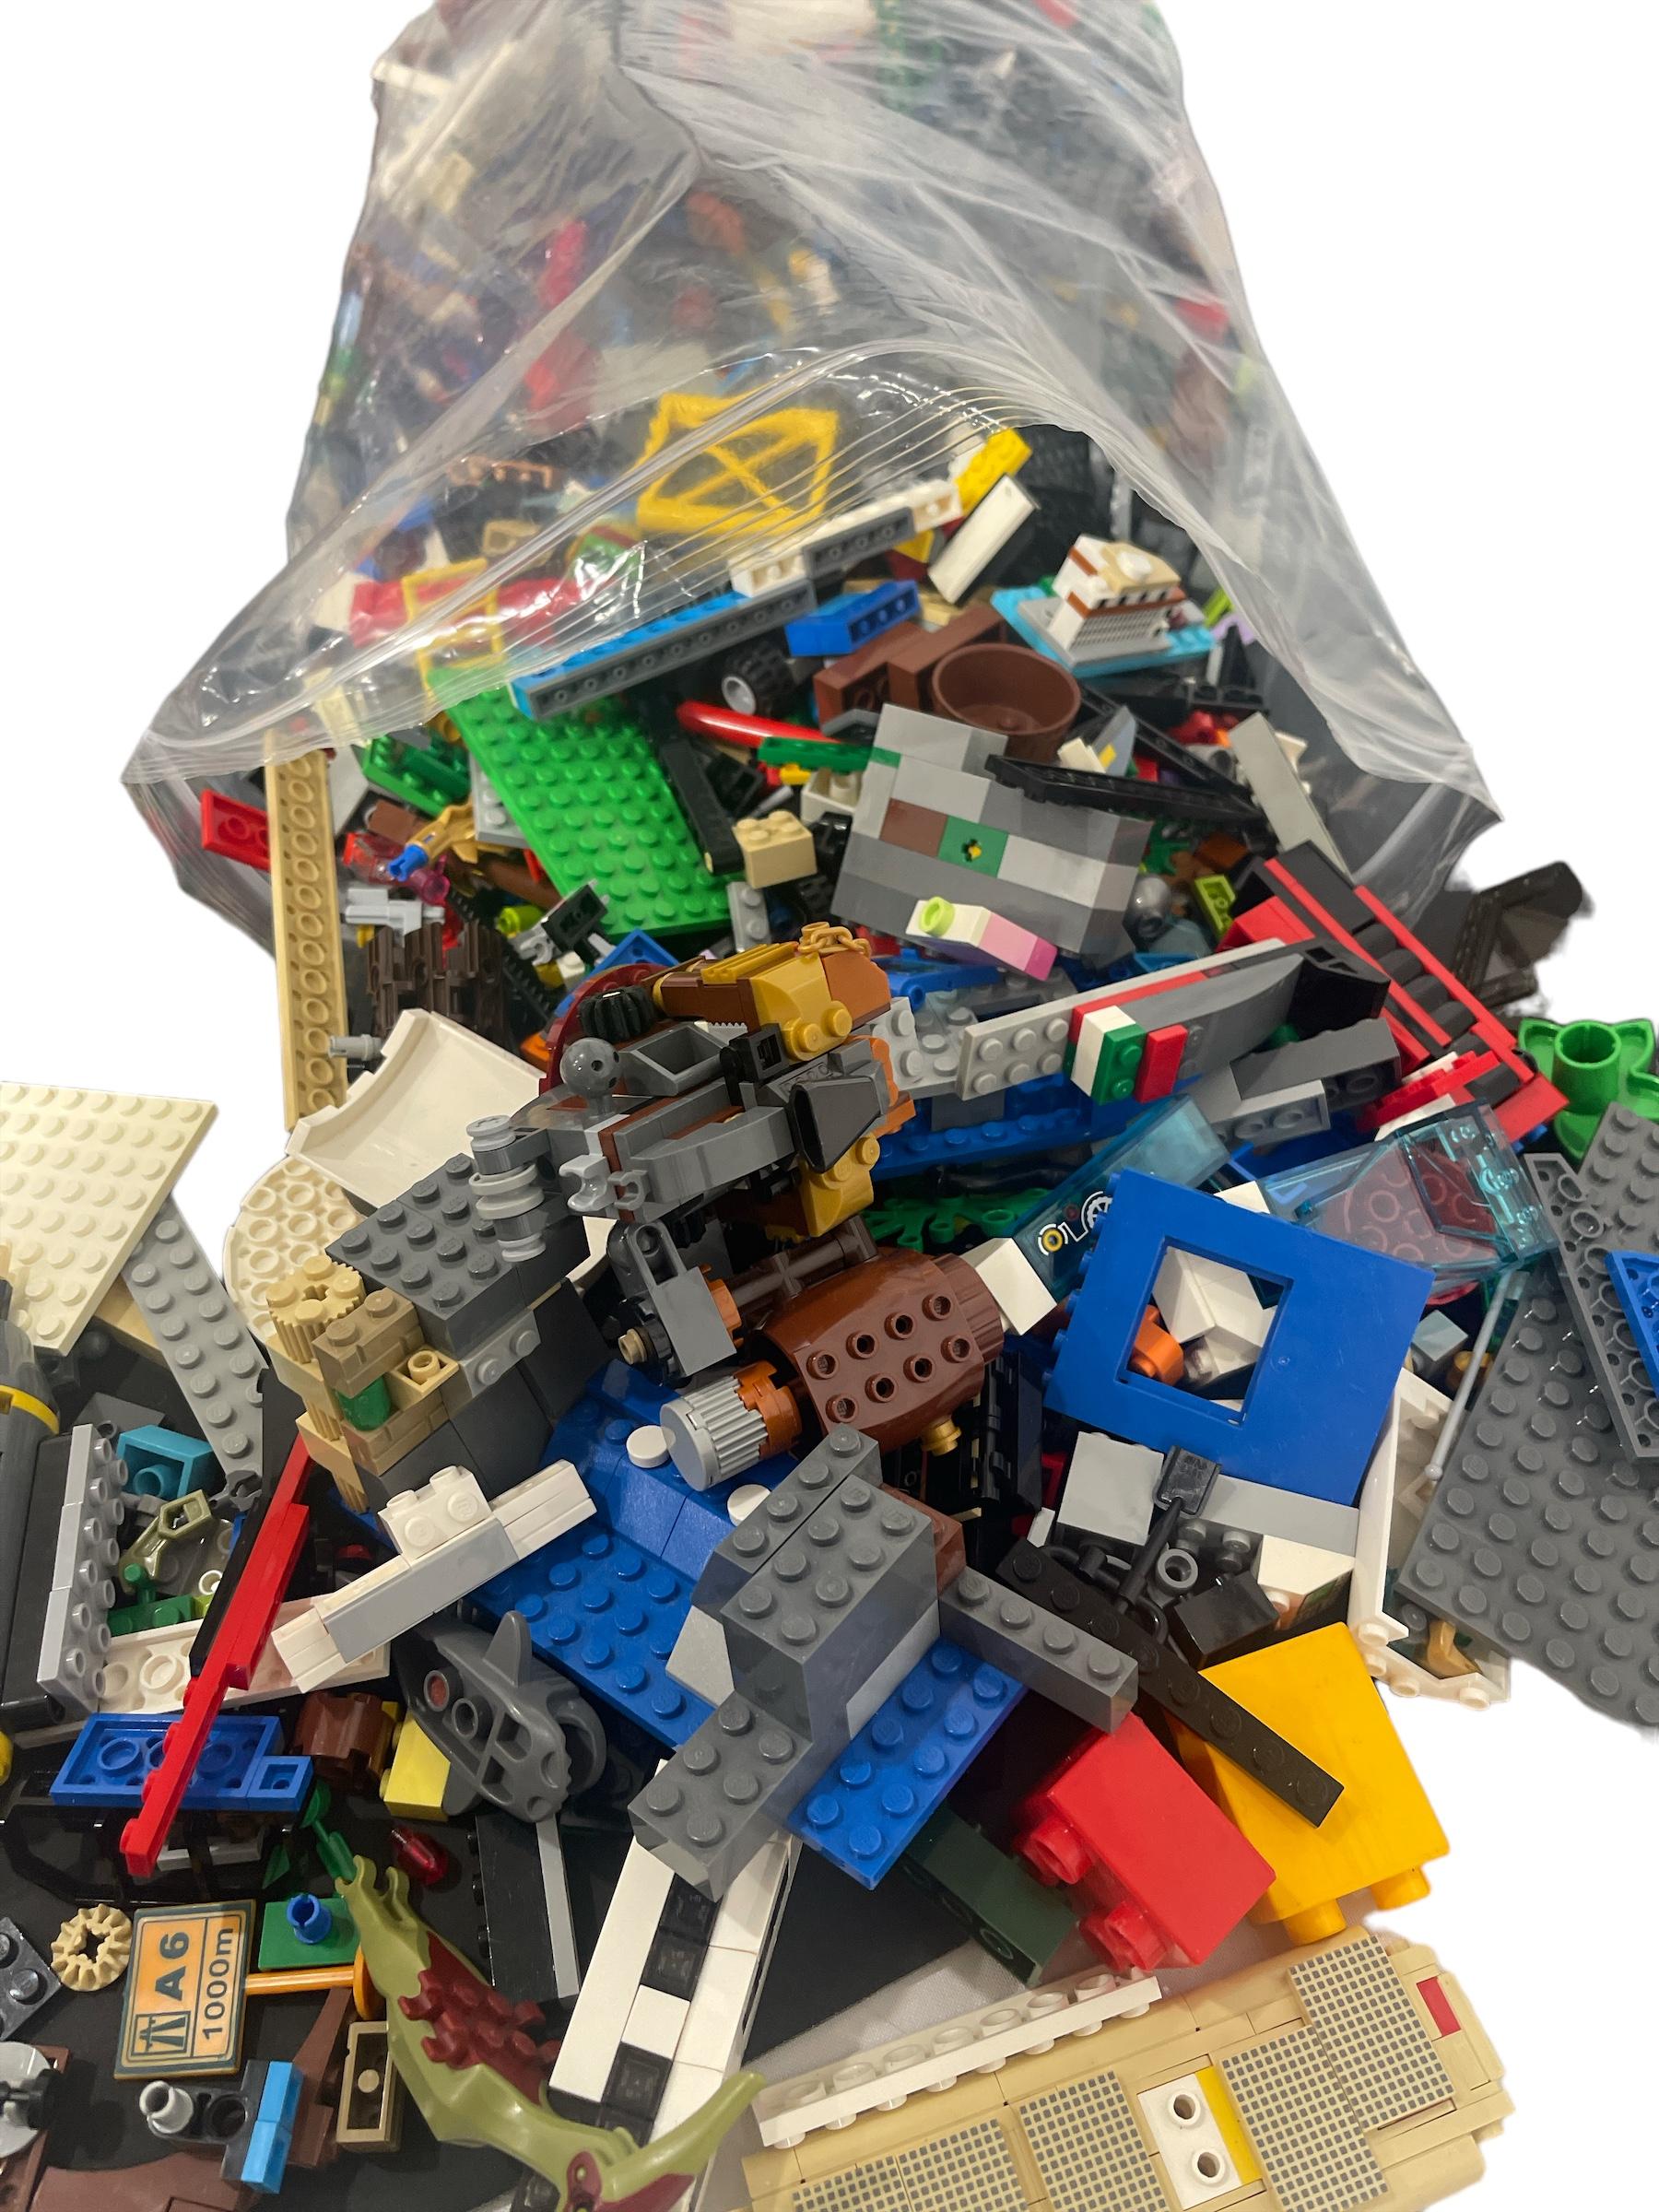 Bag of Assorted LEGO Collection - 6 Pounds